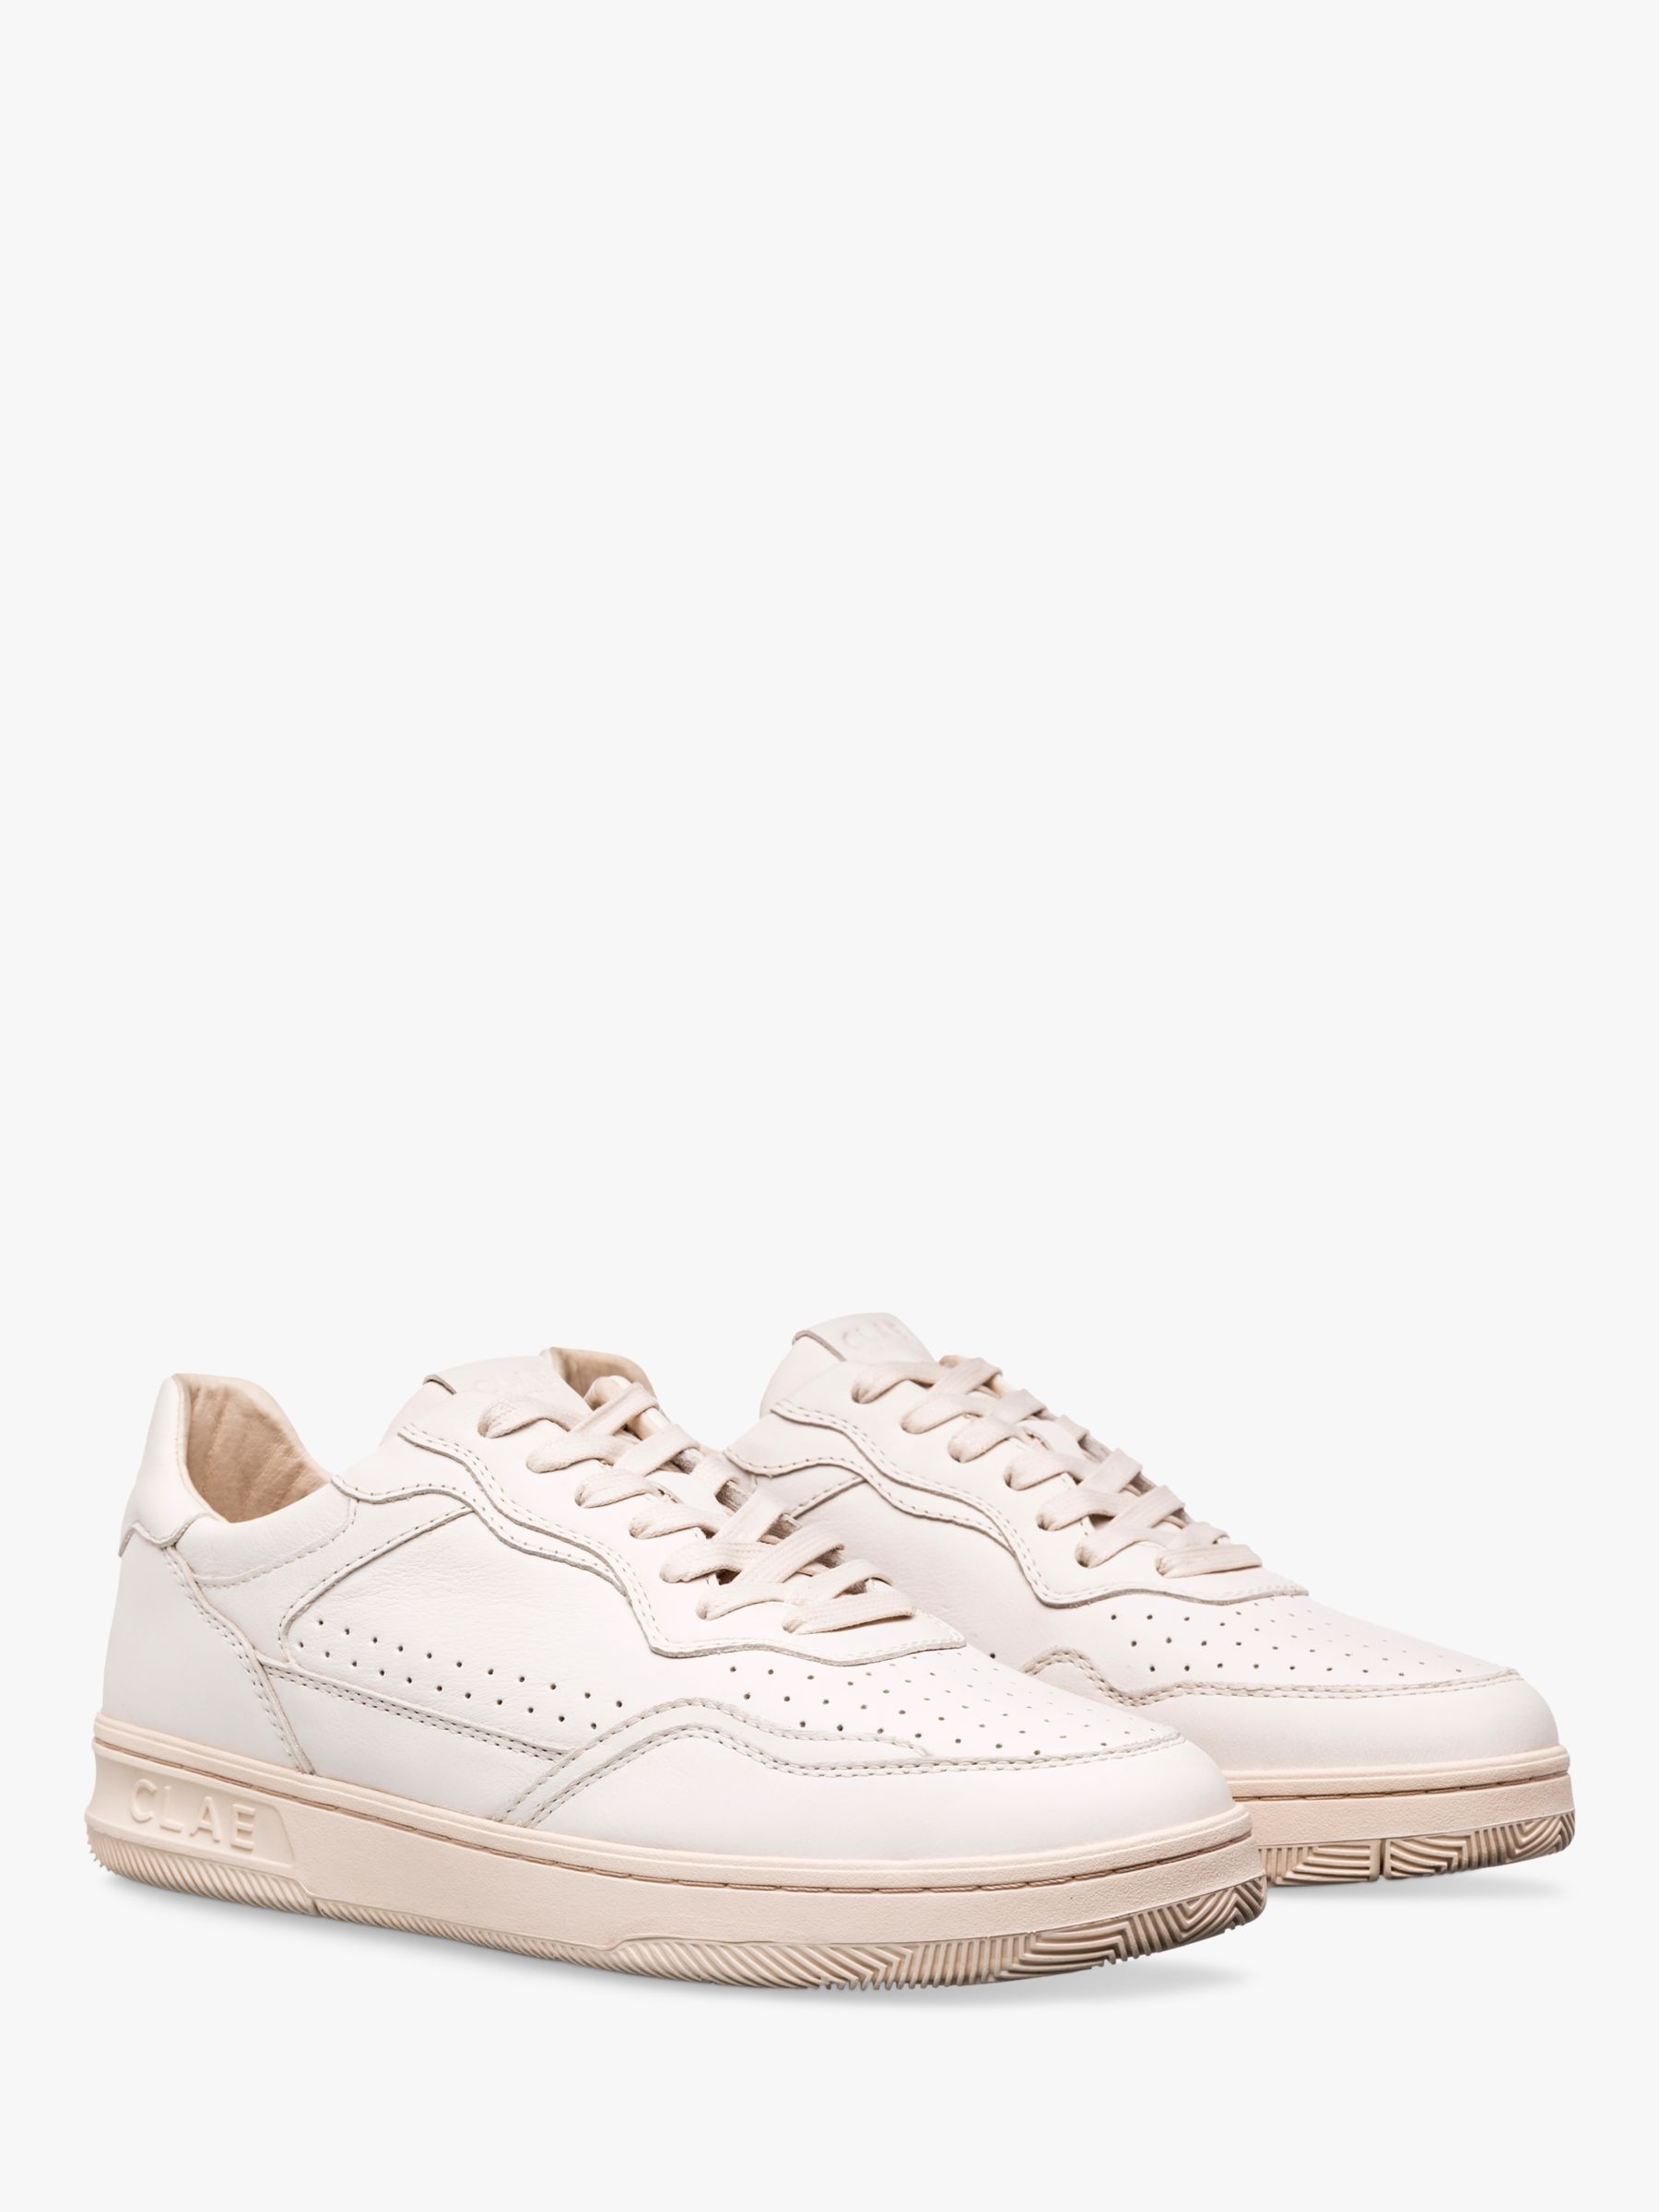 Buy CLAE Haywood Leather Lace Up Trainers Online at johnlewis.com